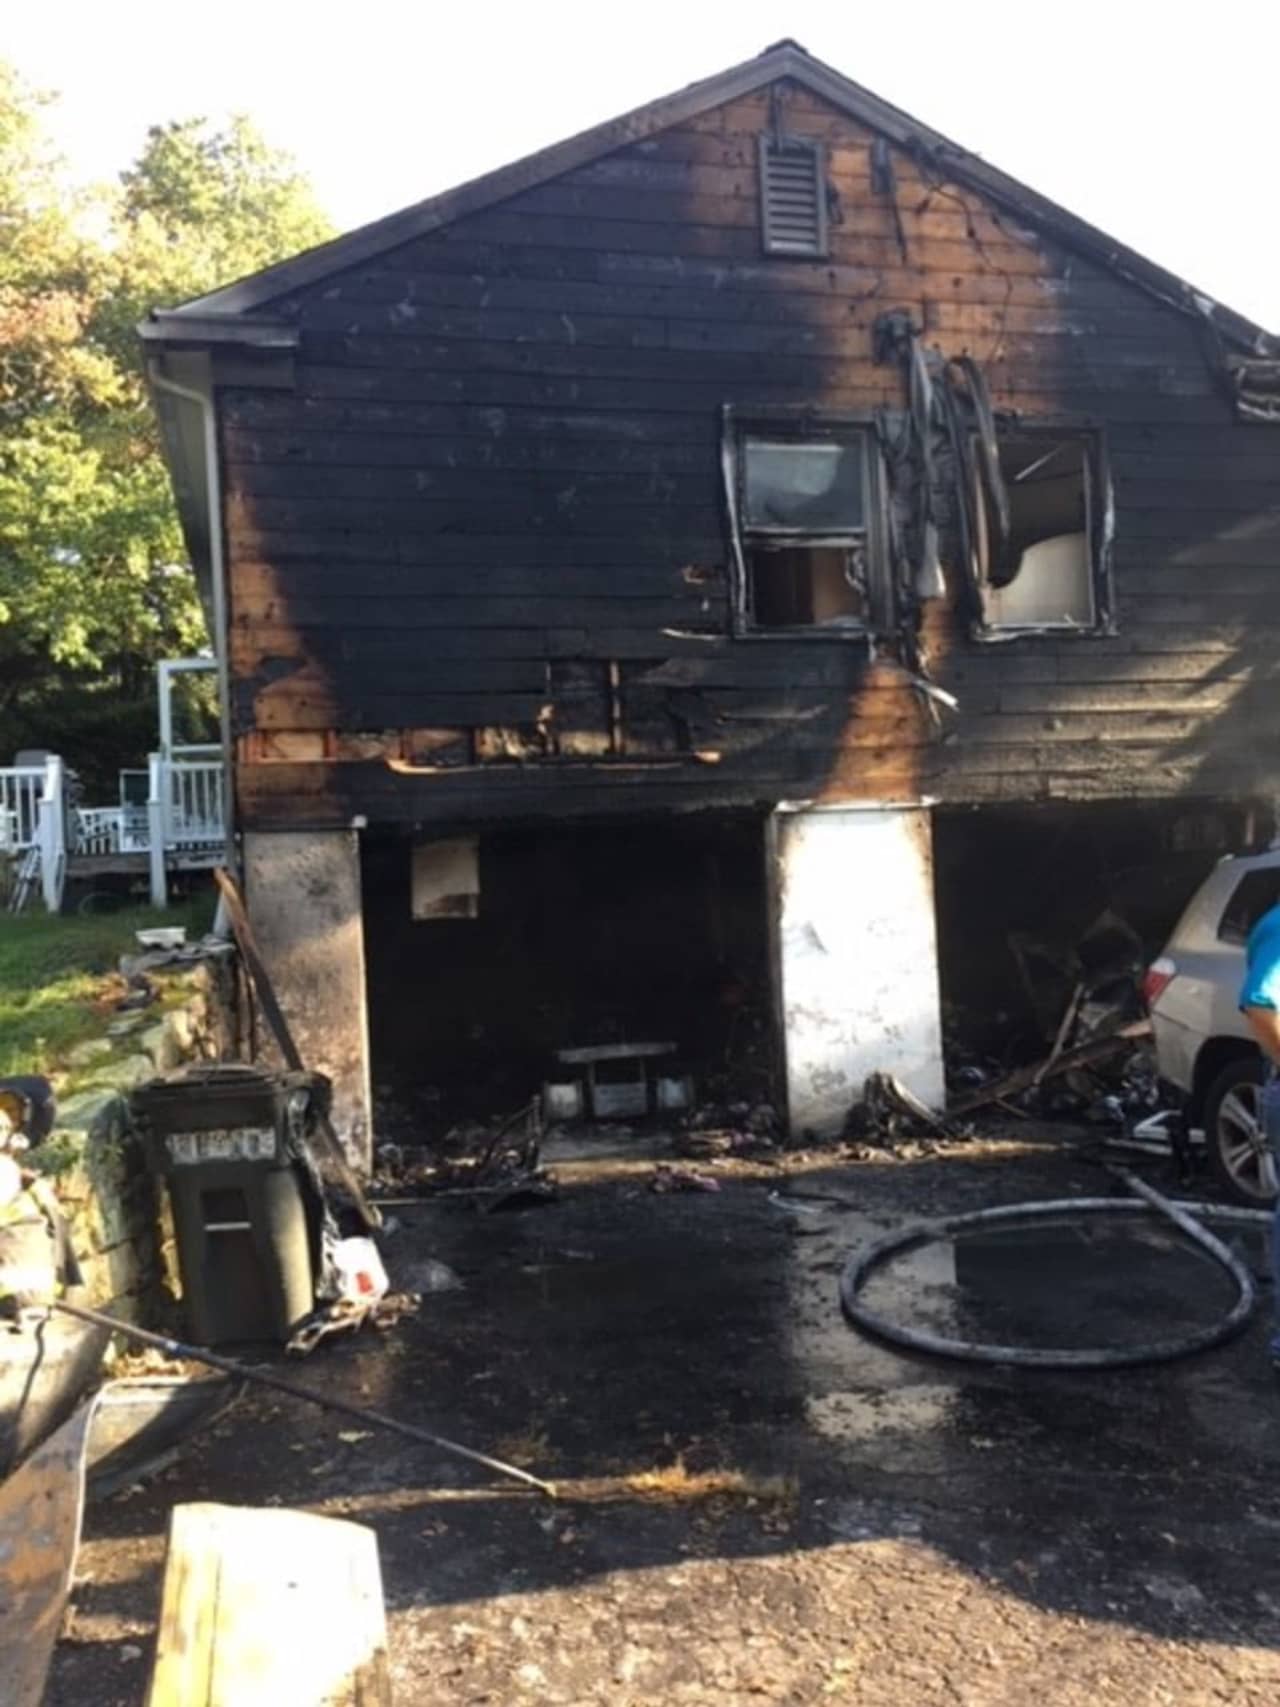 A lawnmower fire extended into a home and caused extensive damage.